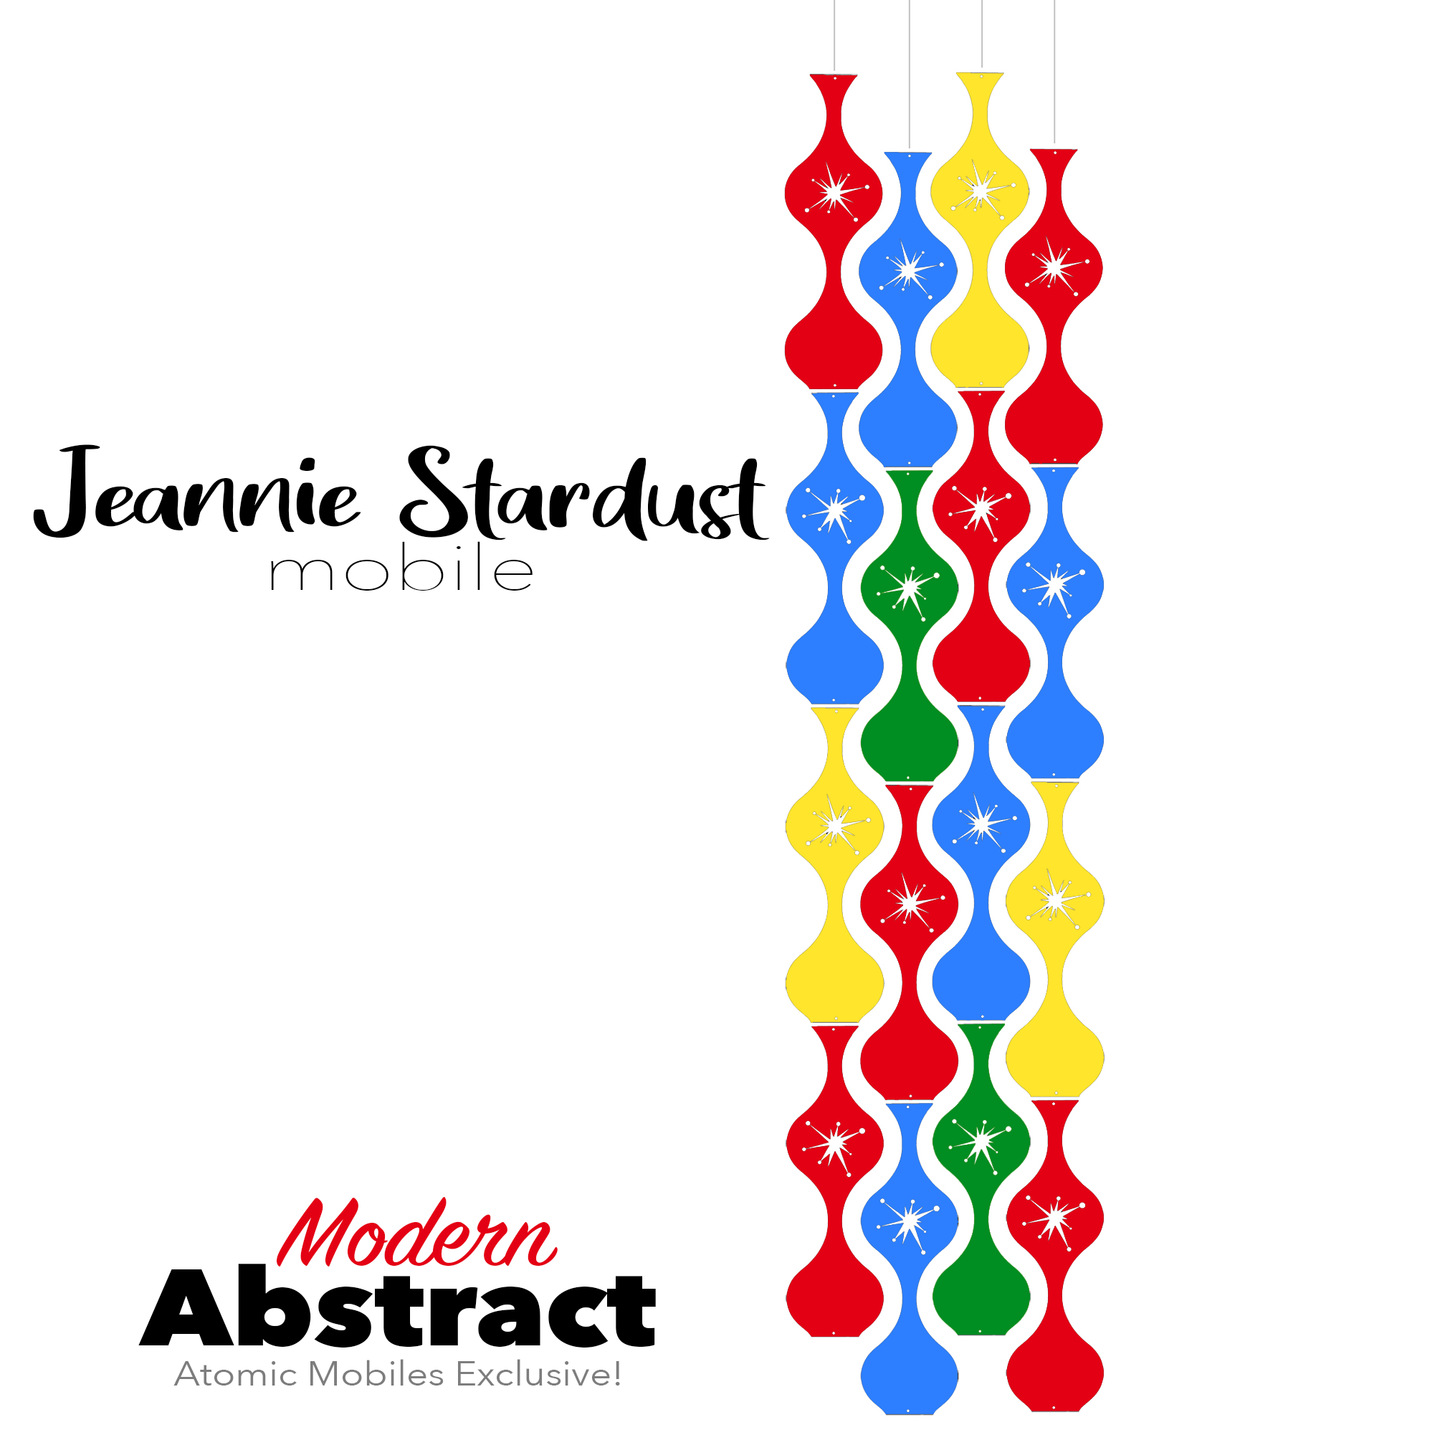 Modern Abstract Jeannie Stardust Hanging Art Mobile - mid century modern home decor in colorful colors of Red, Blue, Yellow, and Green - by AtomicMobiles.com